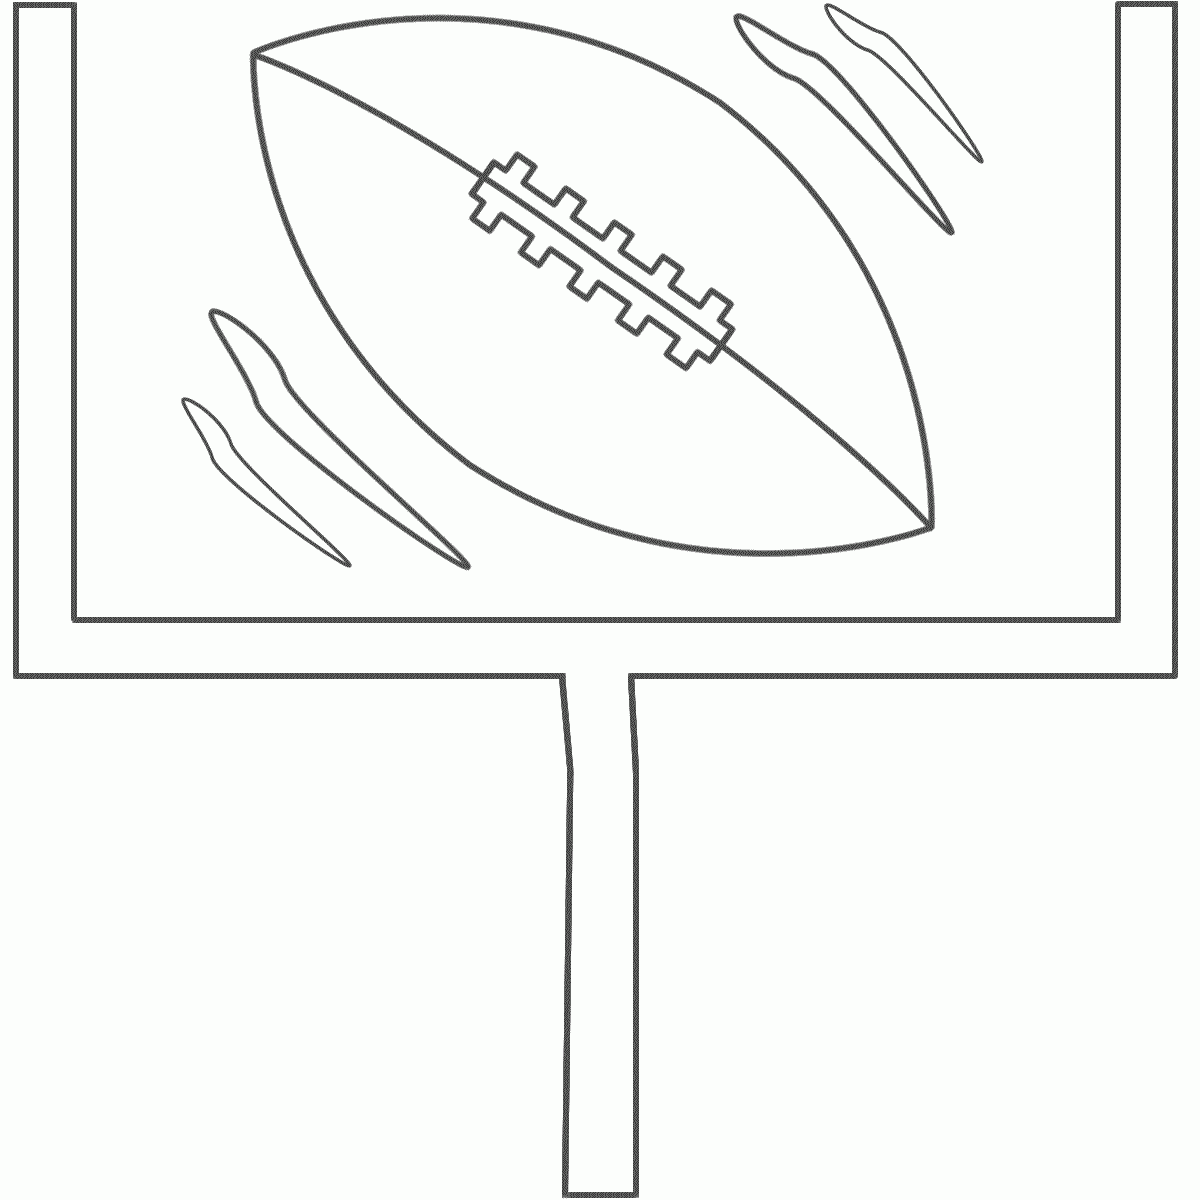 Records Super Bowl 2016 Helmet Coloring Page Free Printable ...